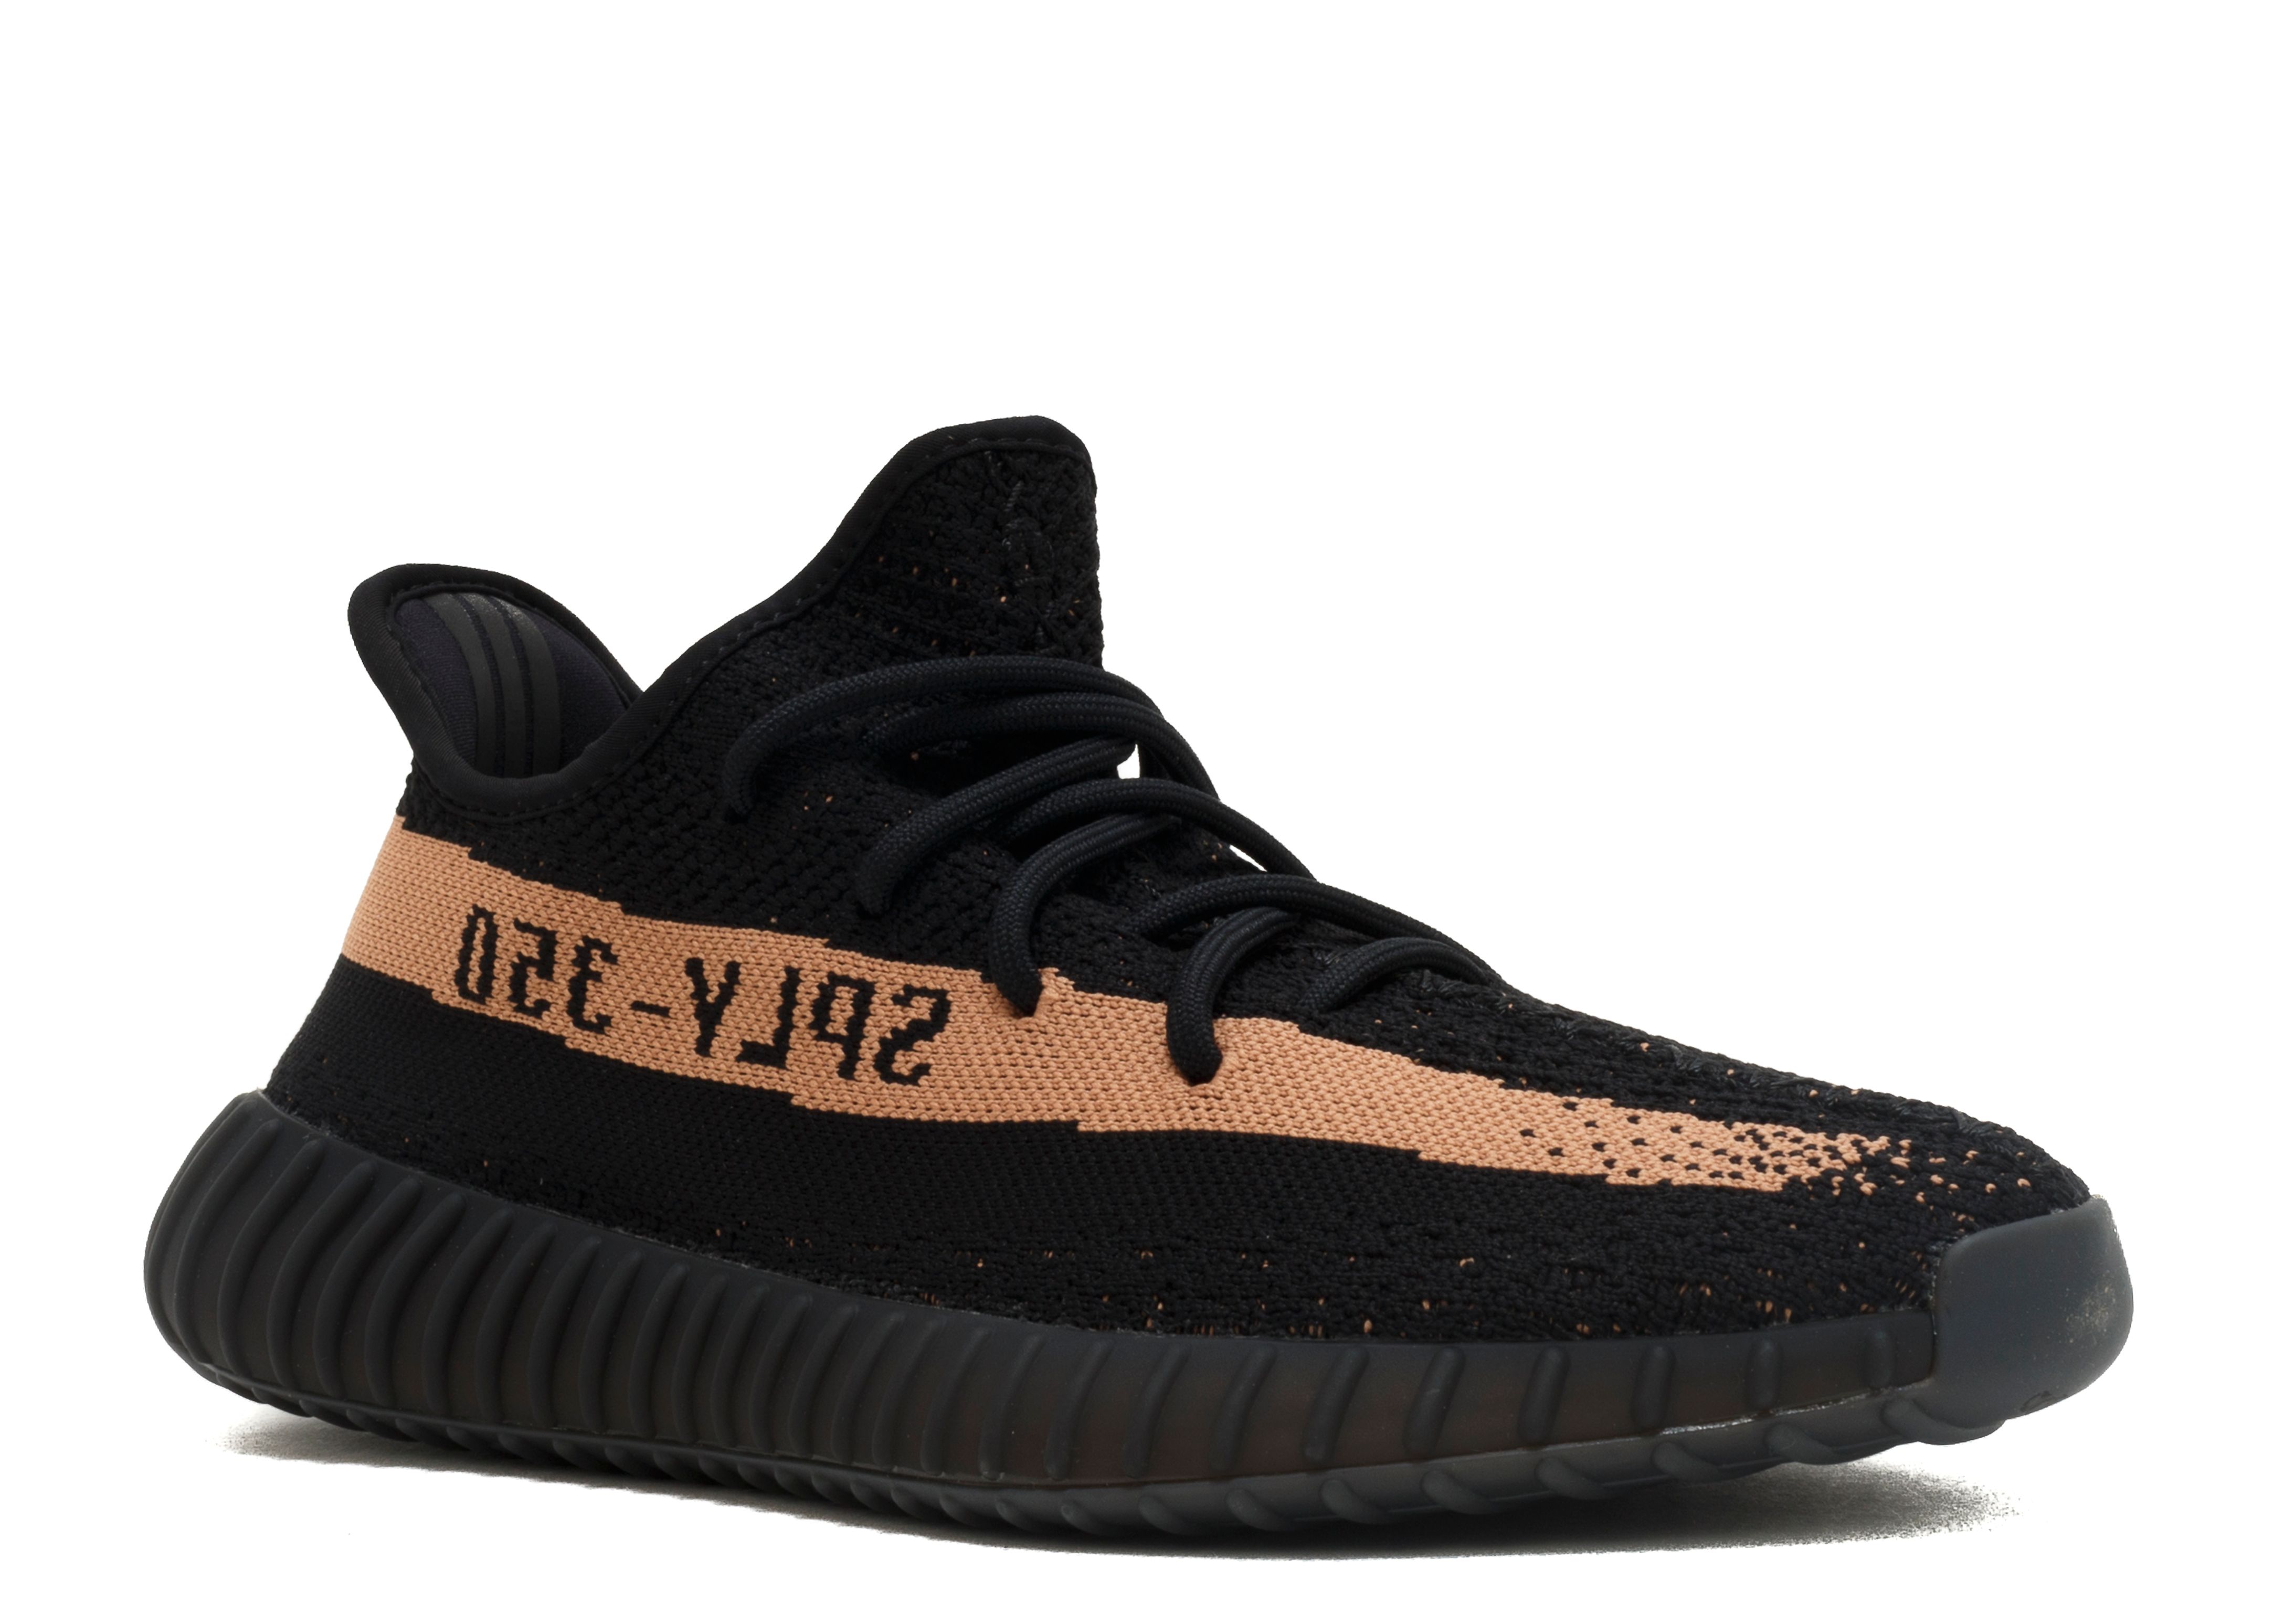 Yeezy Boost 350 V2 'Copper' - Adidas - BY1605 - core black/copper 